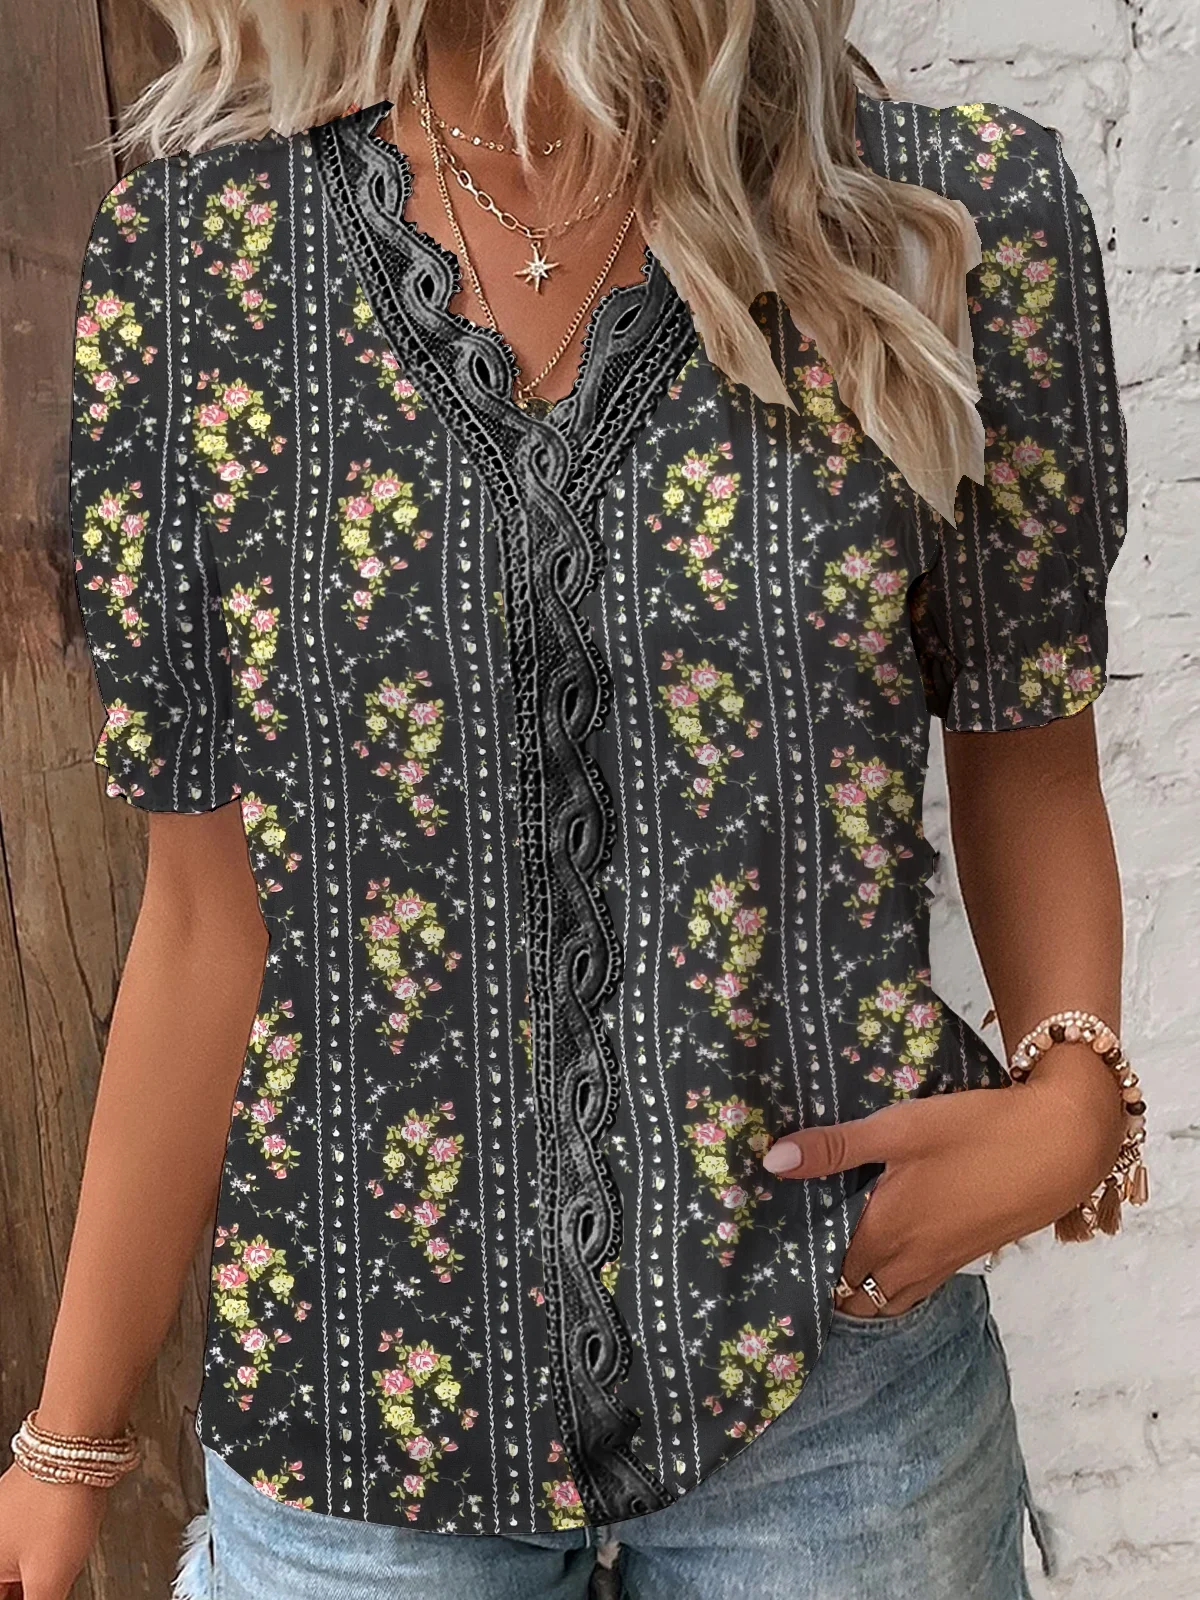 Lace Loose Casual Floral Blouse | justfashionnow